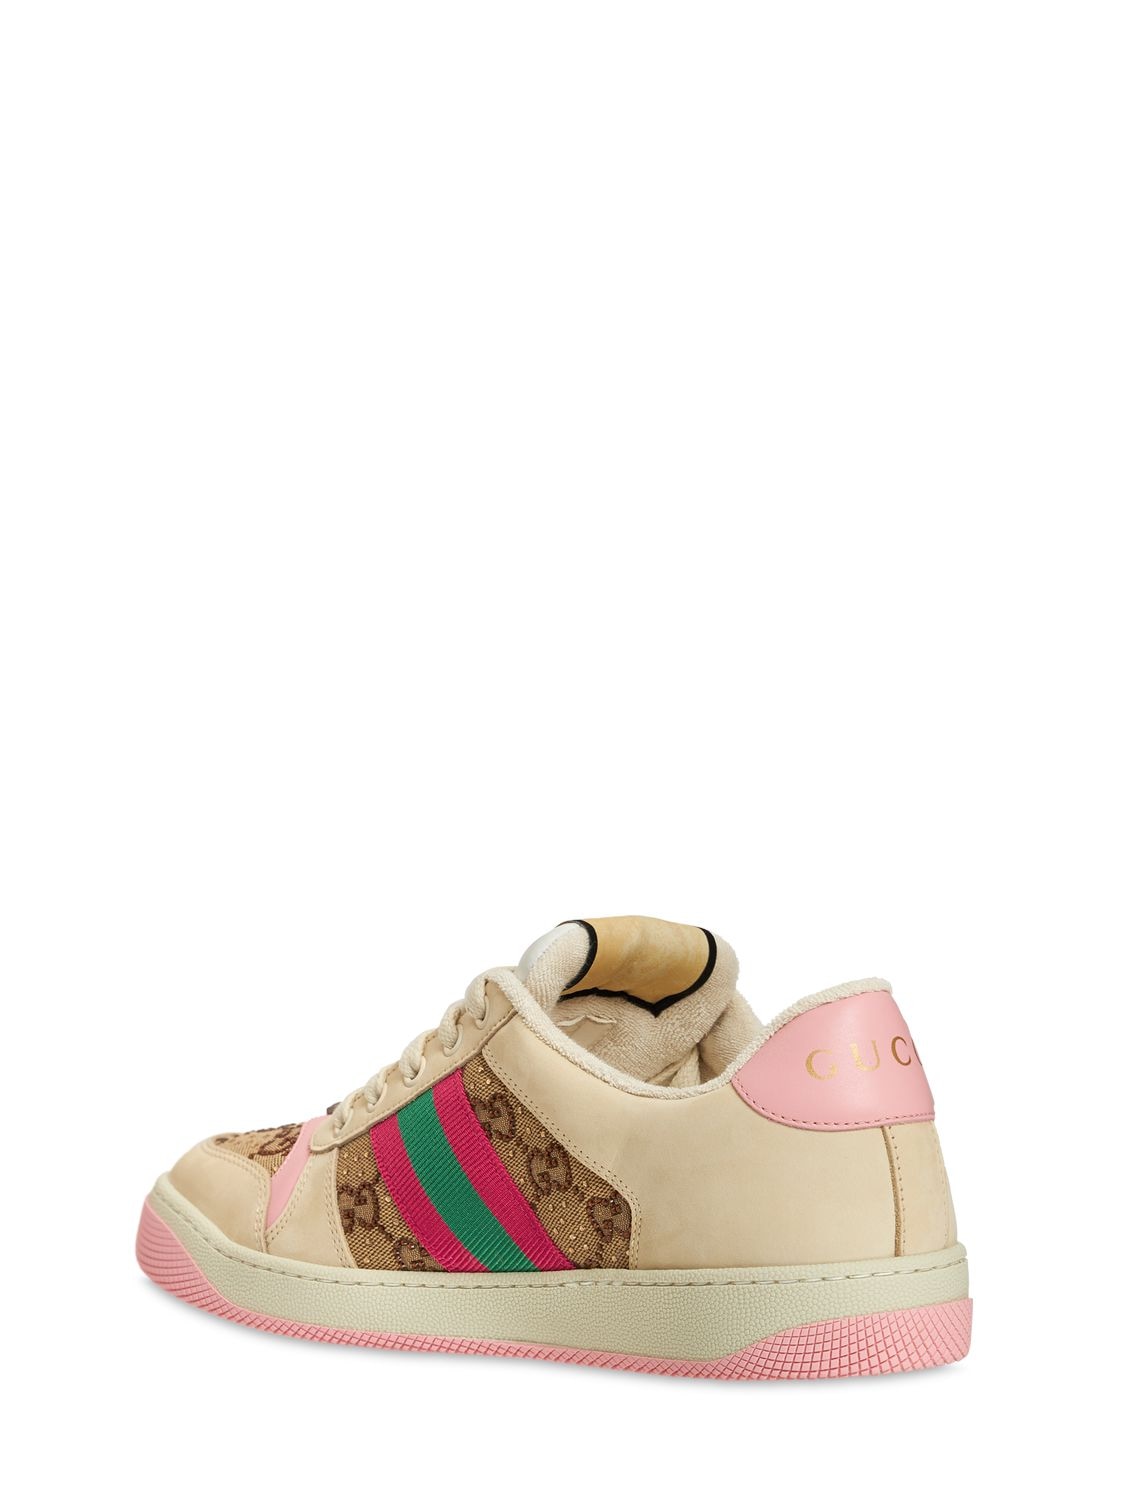 Shop Gucci 30mm Screener Embellished Sneakers In Off-white,beige